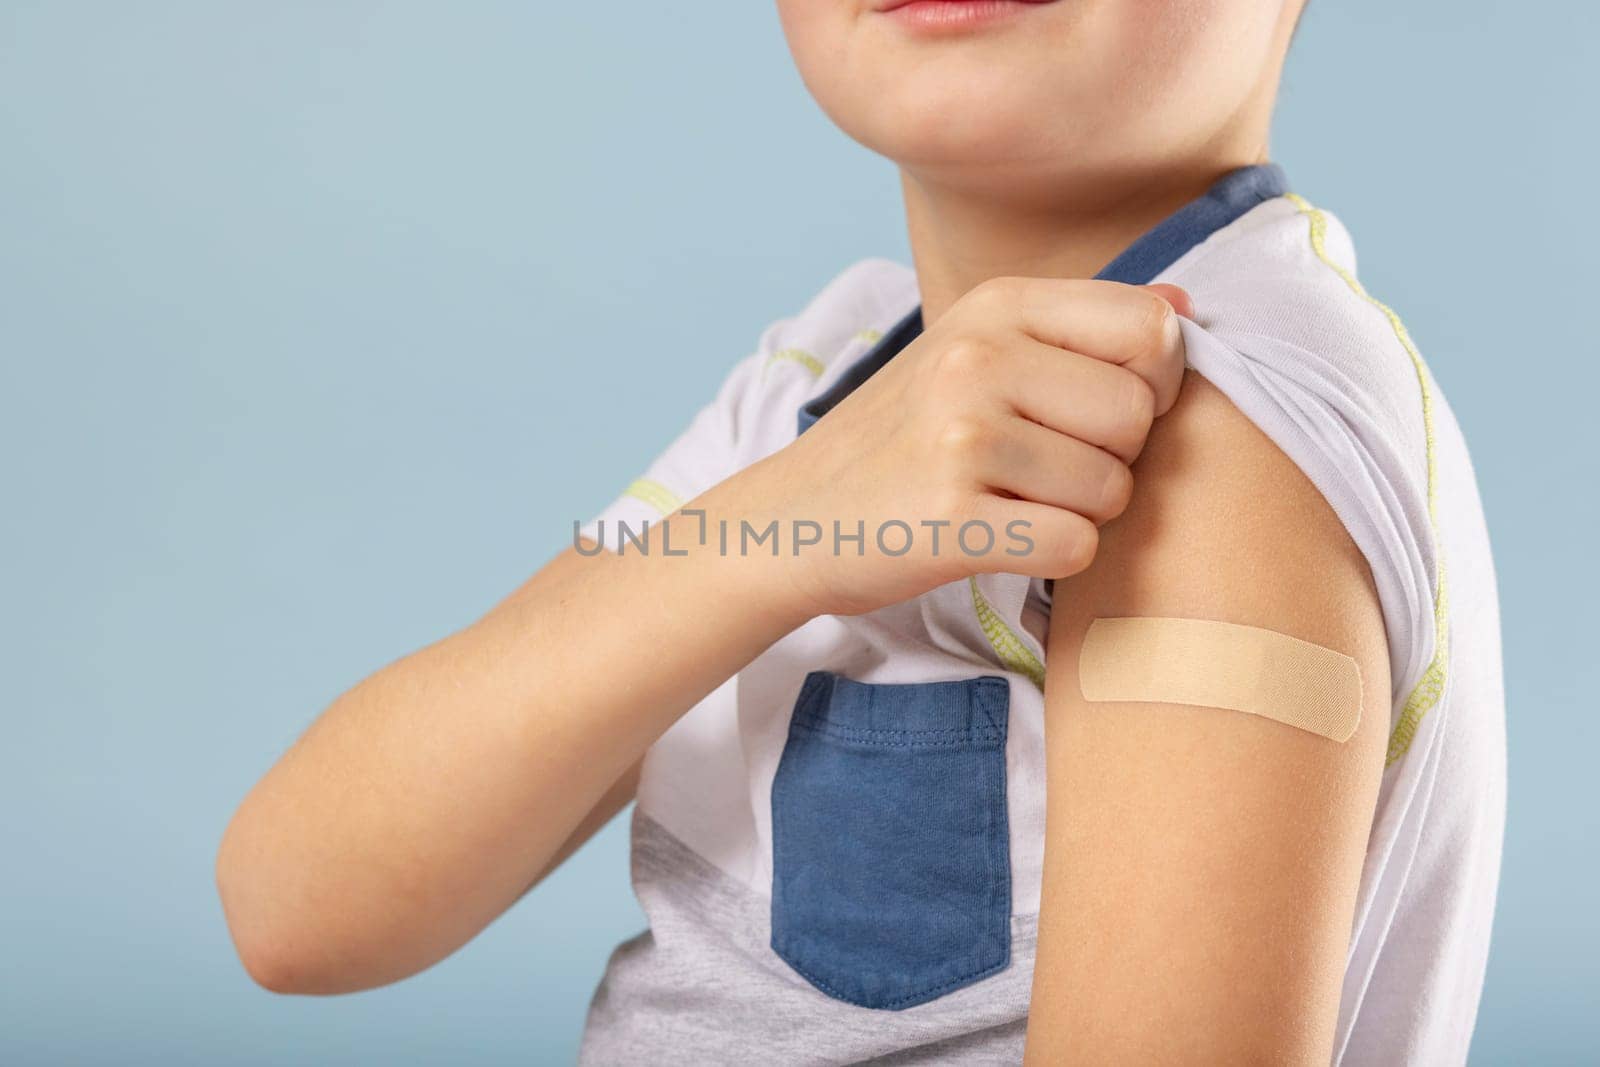 Vaccination of children. Vaccinated kid boy showing arm with adhesive bandage after vaccine injection. Kids and covid-19 prevention, antiviral immunization.